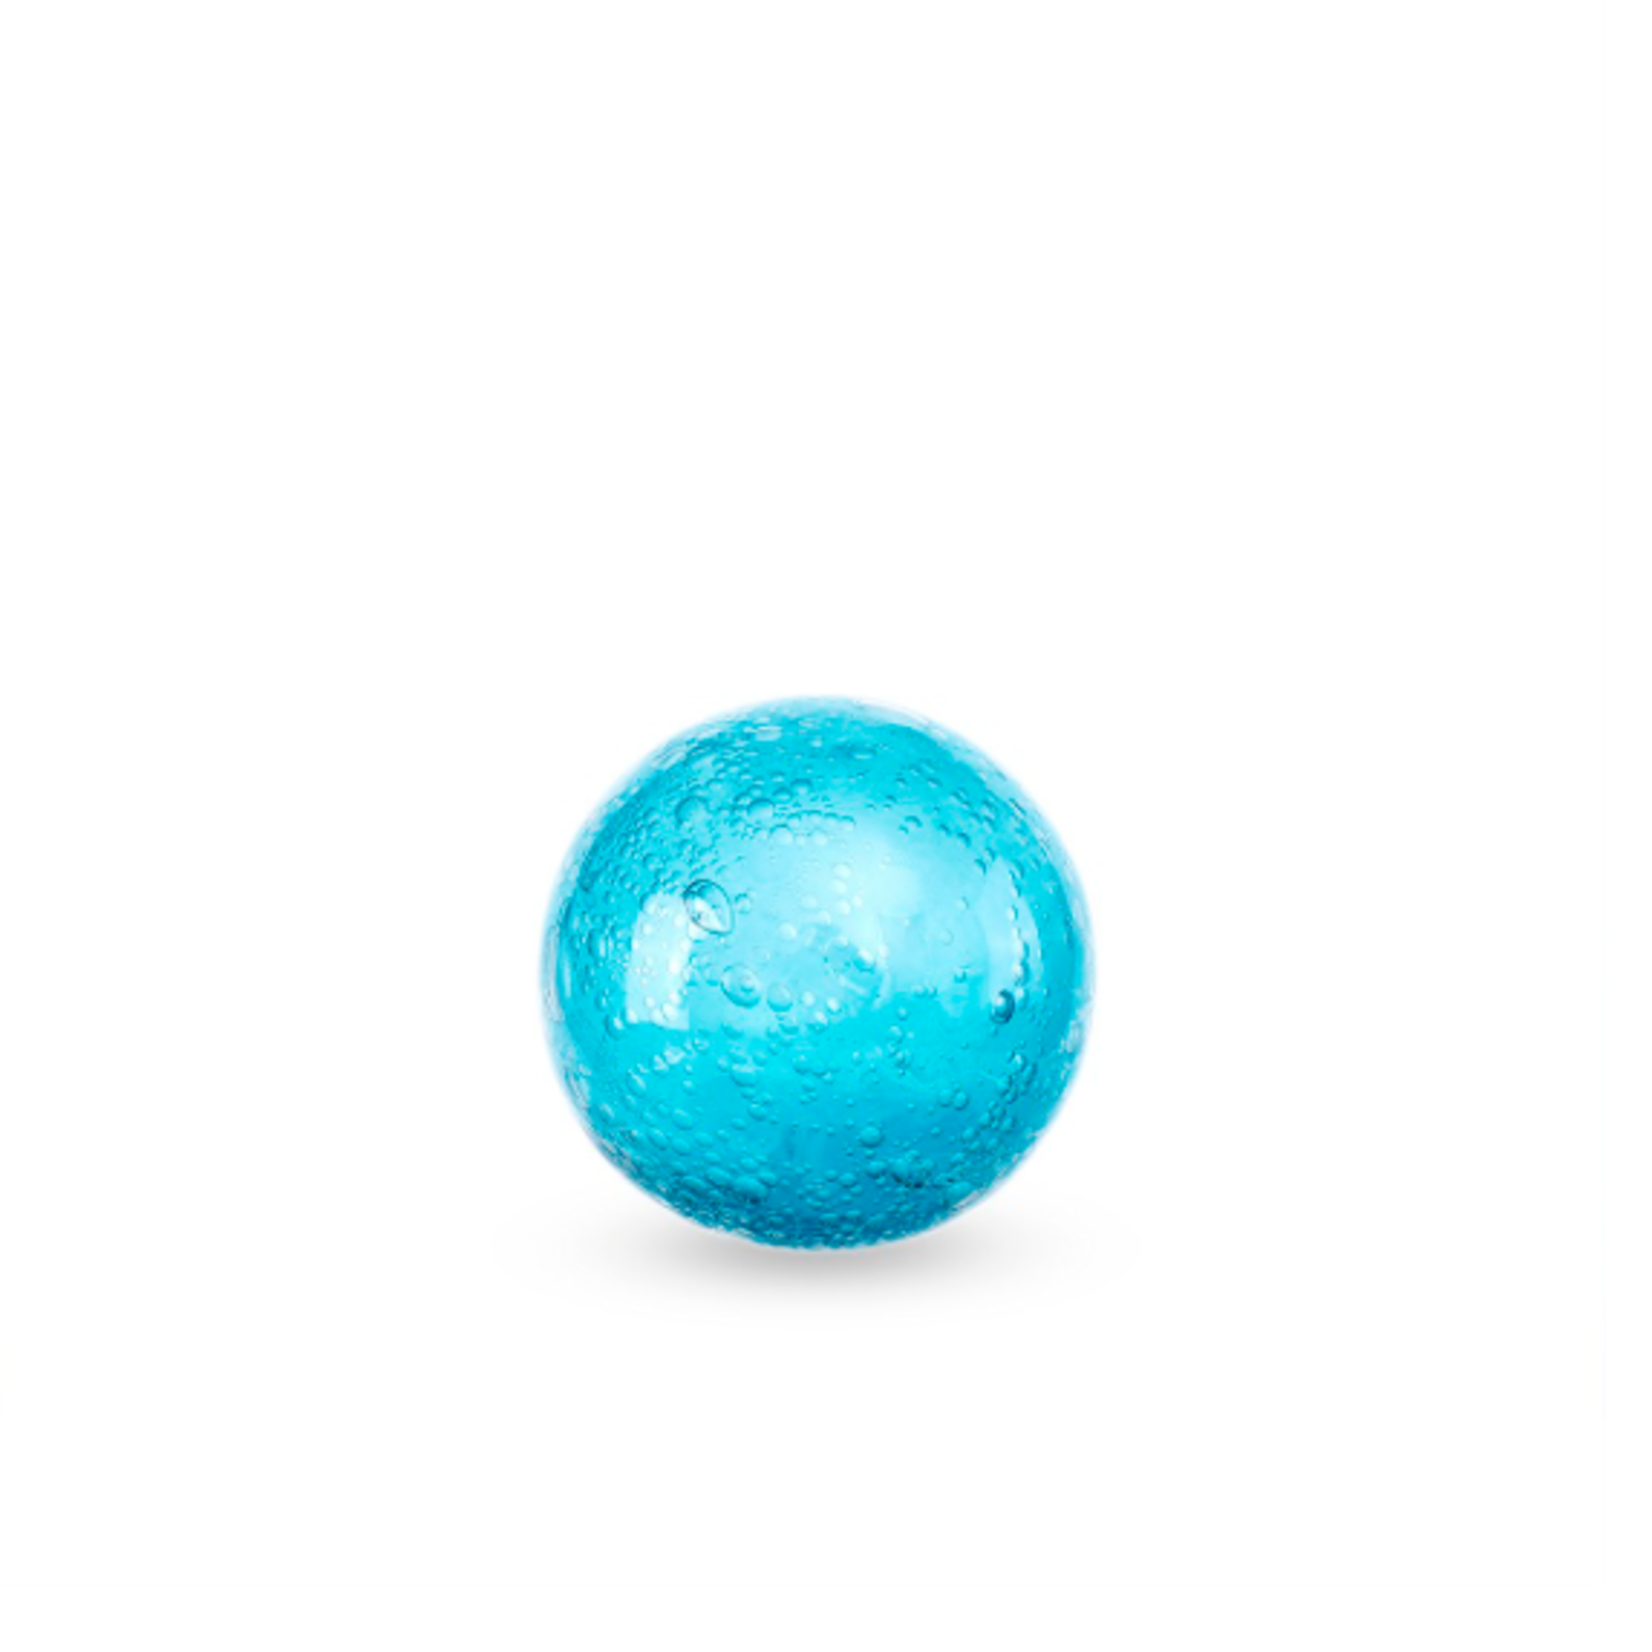 40% off was $10 now $6. 4”D BLUE DECORATIVE GLASS BALL SPHERE